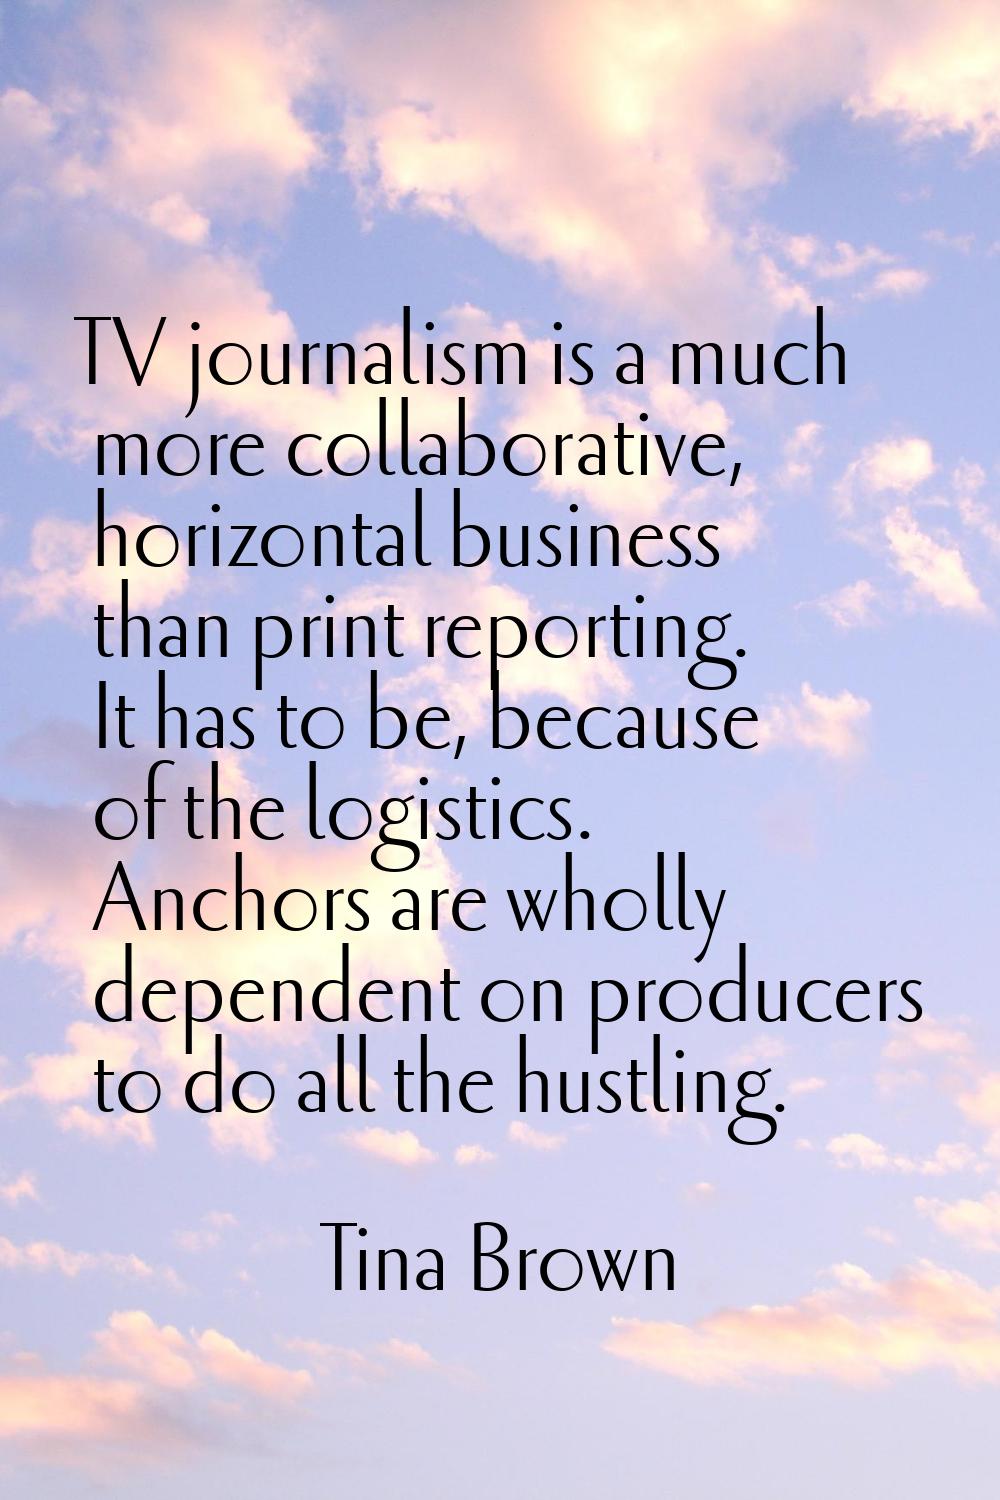 TV journalism is a much more collaborative, horizontal business than print reporting. It has to be,